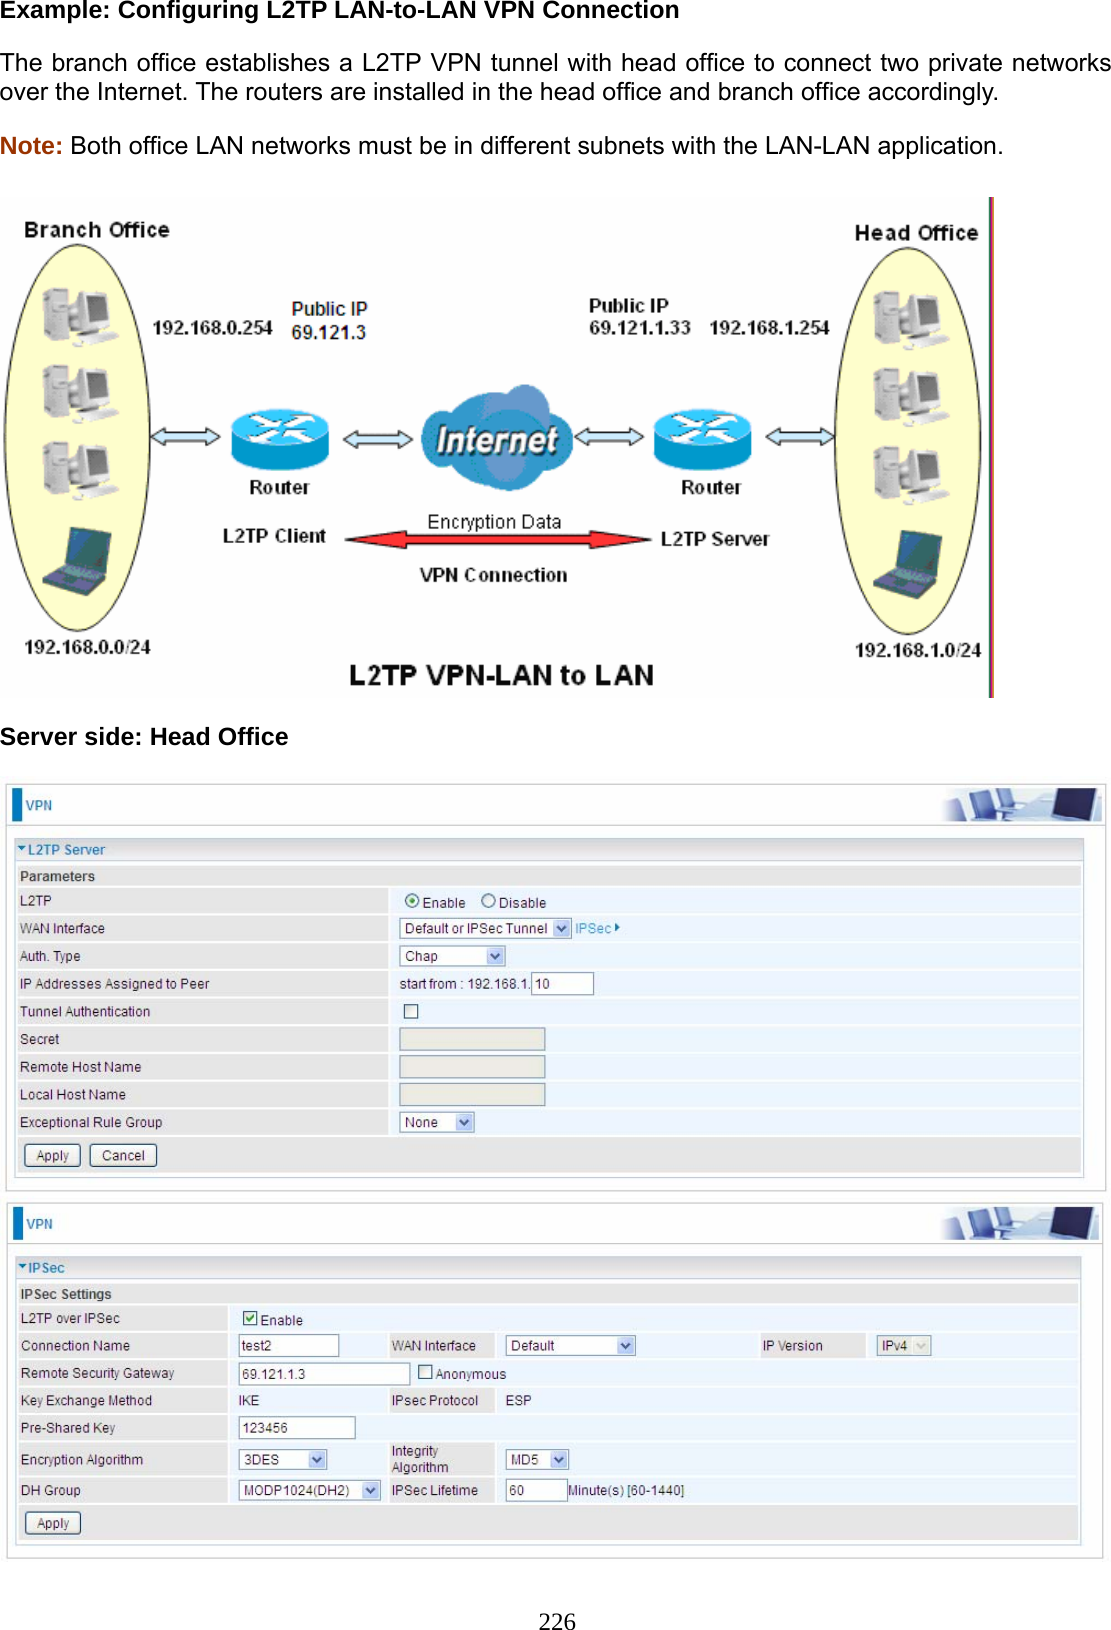 226 Example: Configuring L2TP LAN-to-LAN VPN Connection The branch office establishes a L2TP VPN tunnel with head office to connect two private networks over the Internet. The routers are installed in the head office and branch office accordingly. Note: Both office LAN networks must be in different subnets with the LAN-LAN application.    Server side: Head Office    